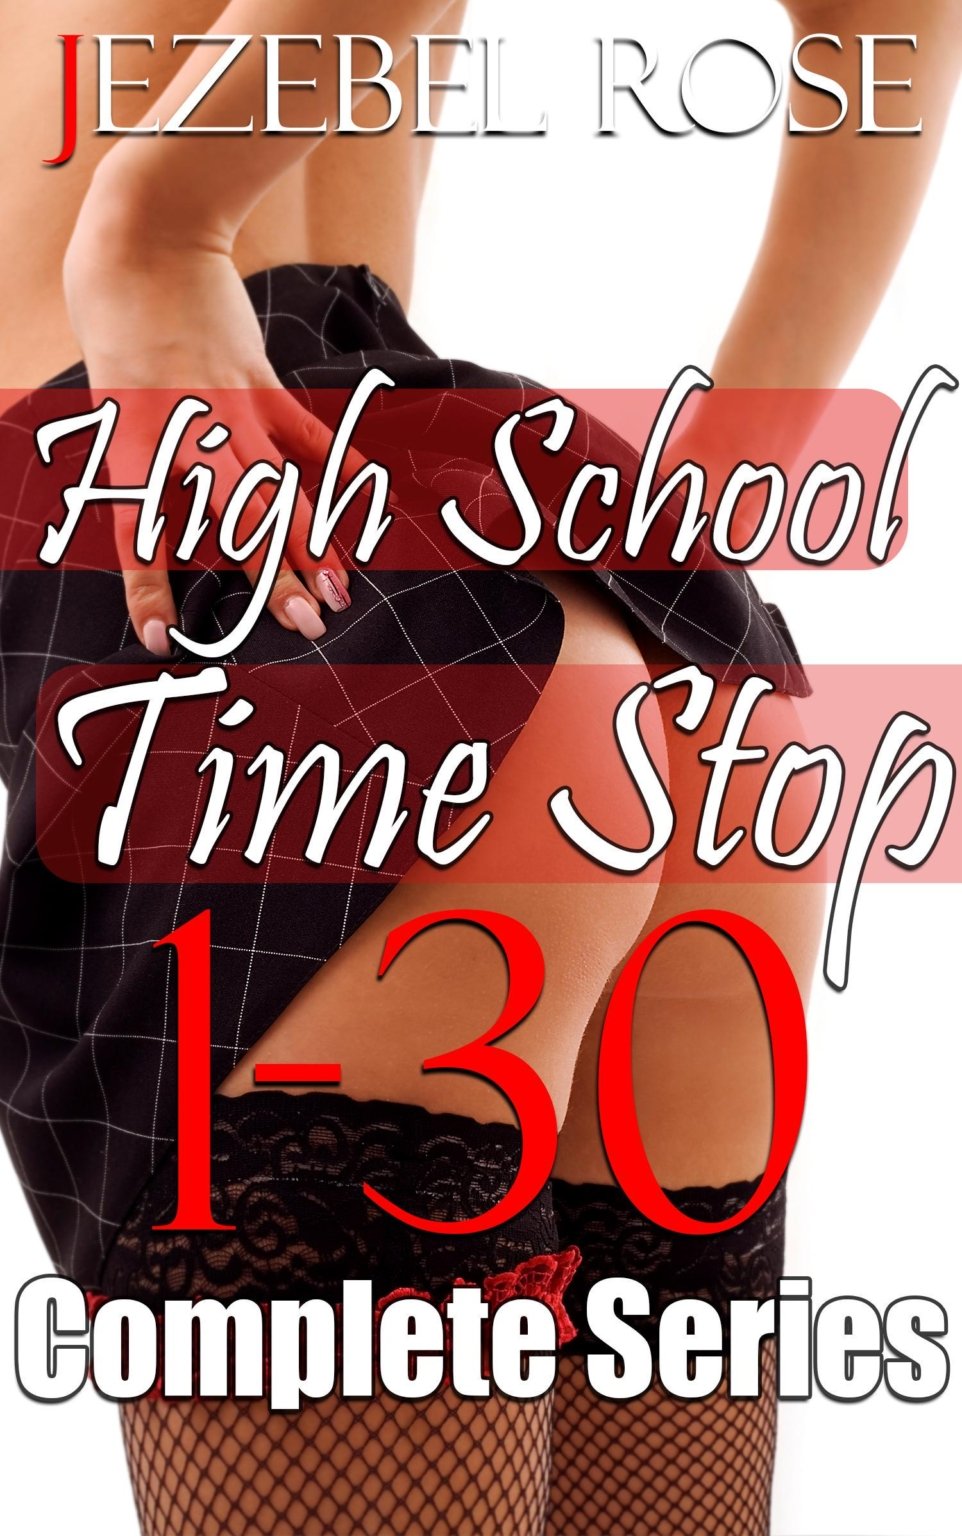 High School Time Stop 1-30